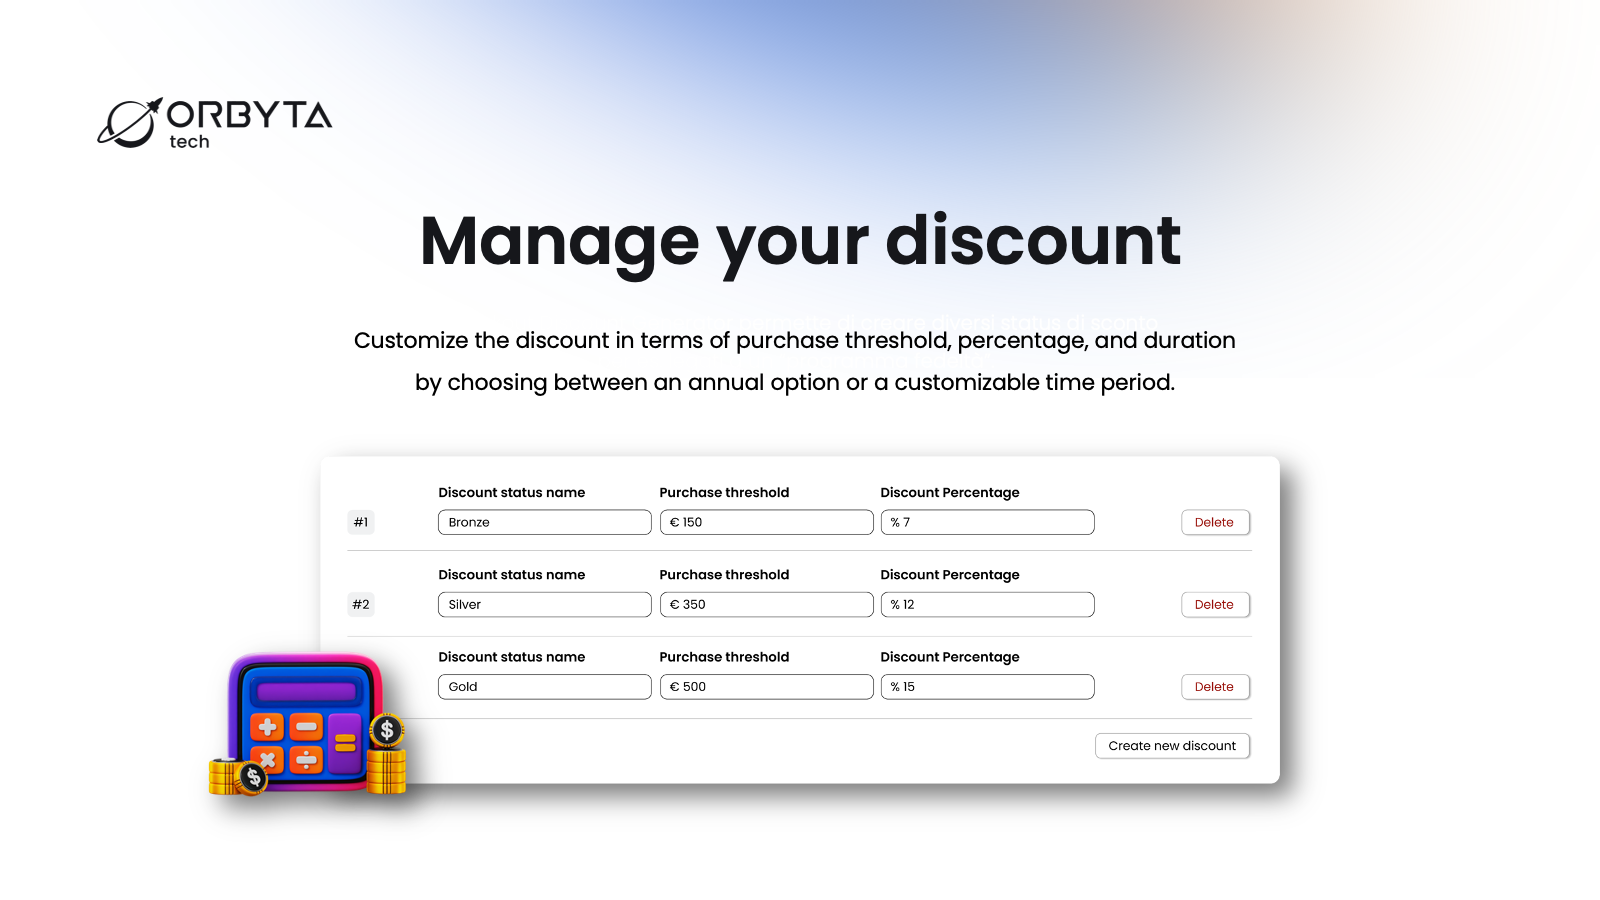 How to manage the discounts